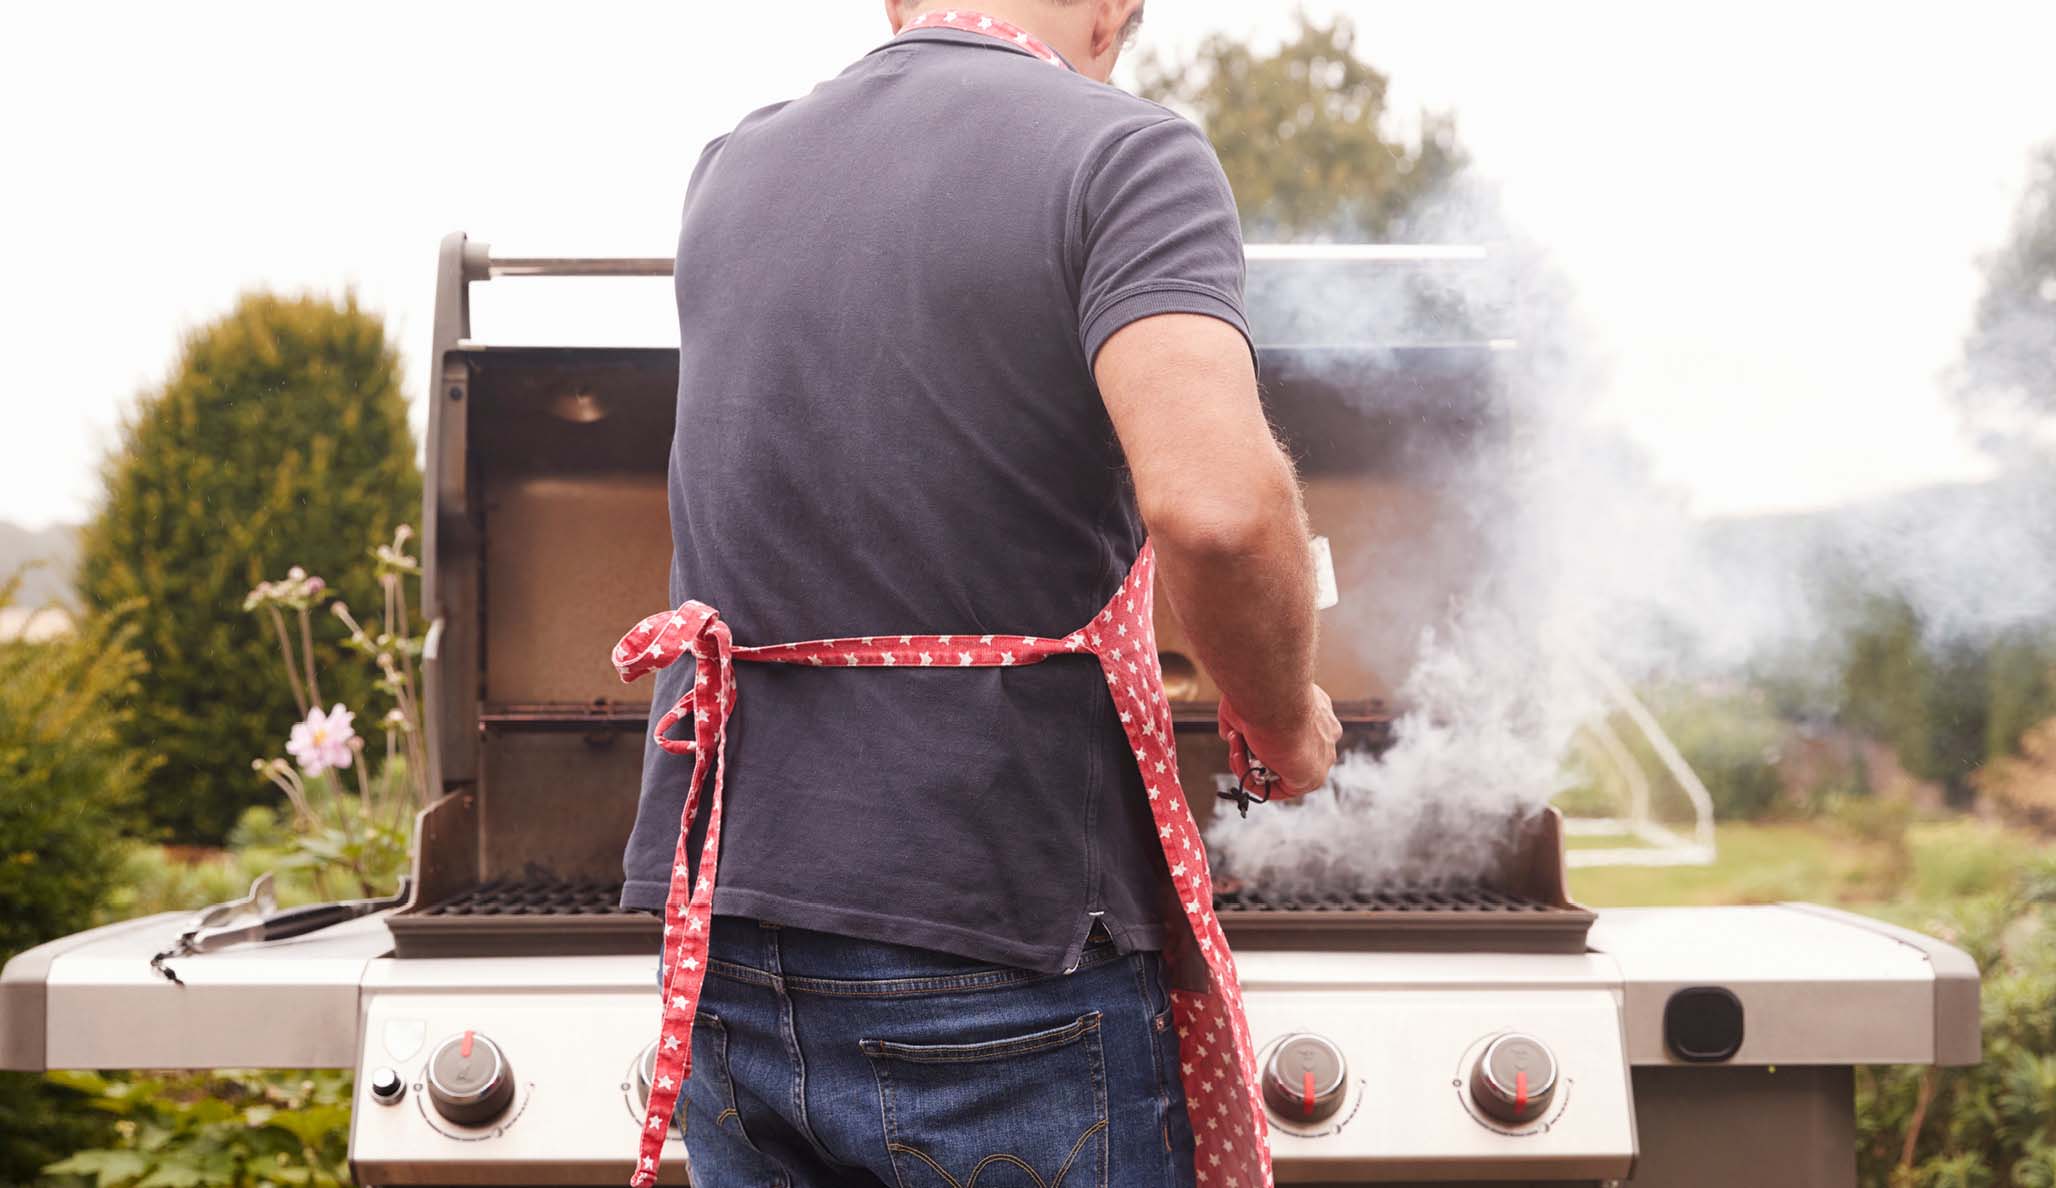 Gas grill BTU 101: How many BTUs do you need for a grill